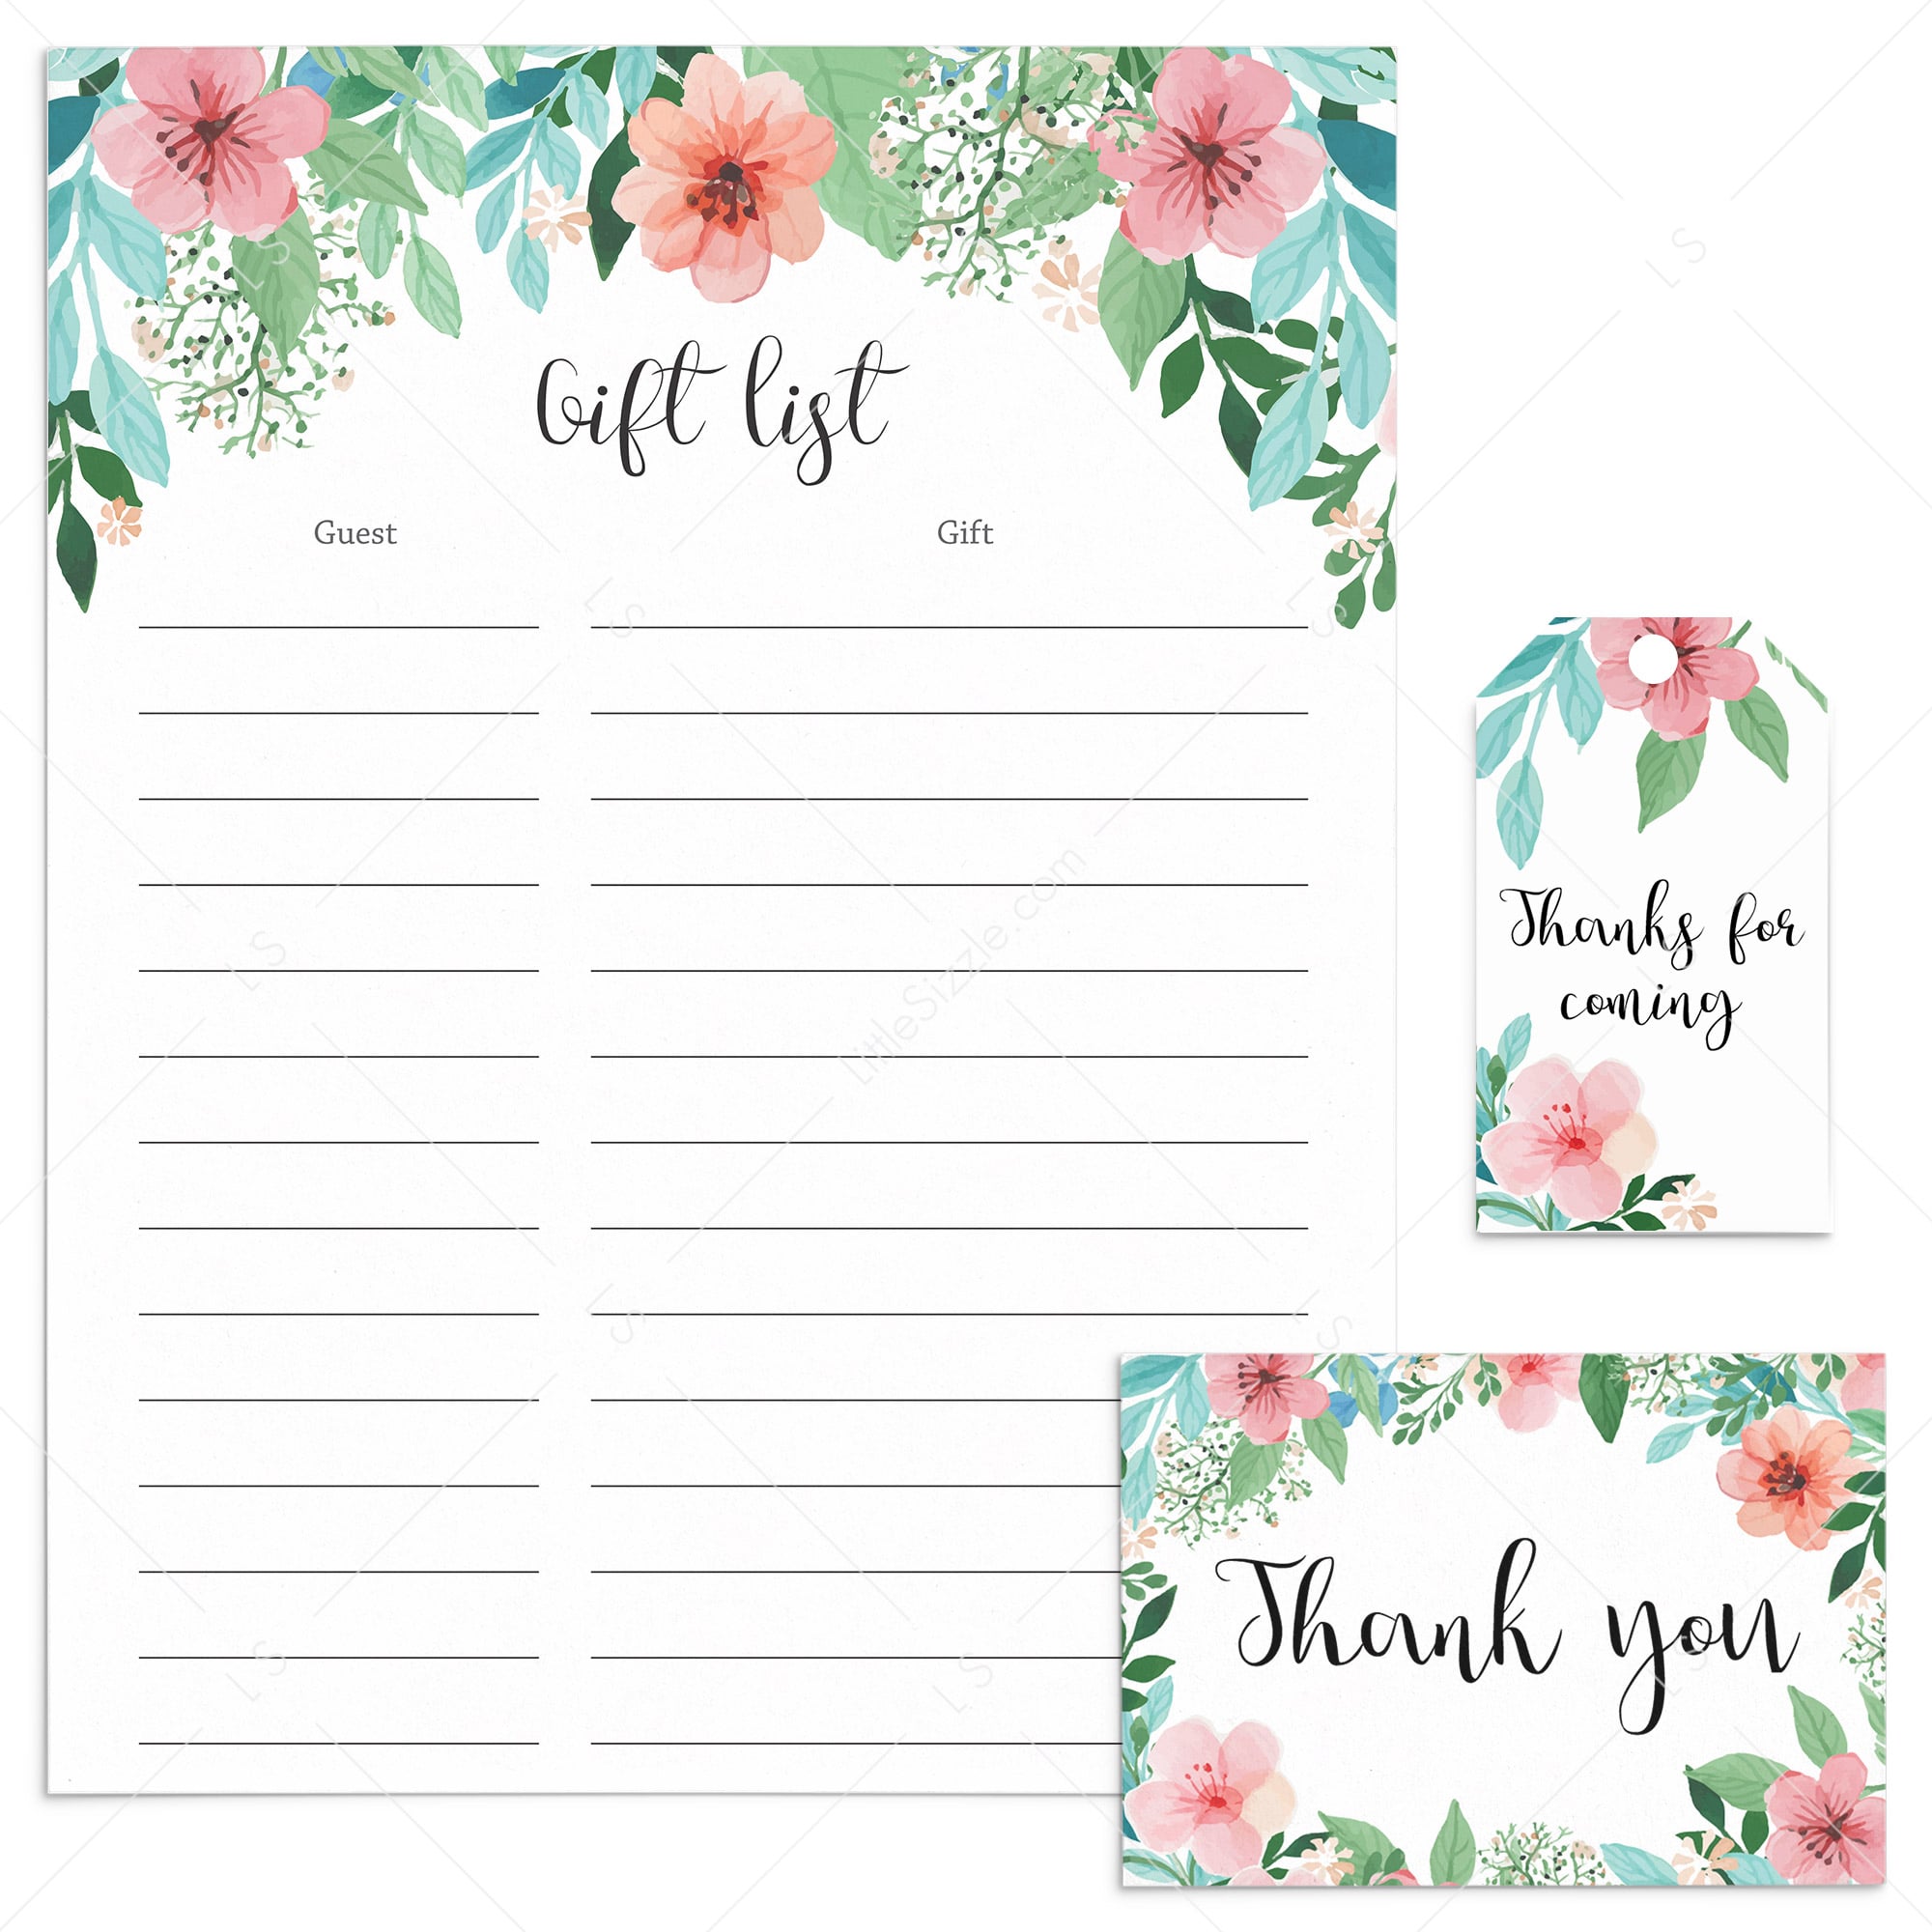 Floral Thank You Cards, Labels and Gift List Printable by LittleSizzle